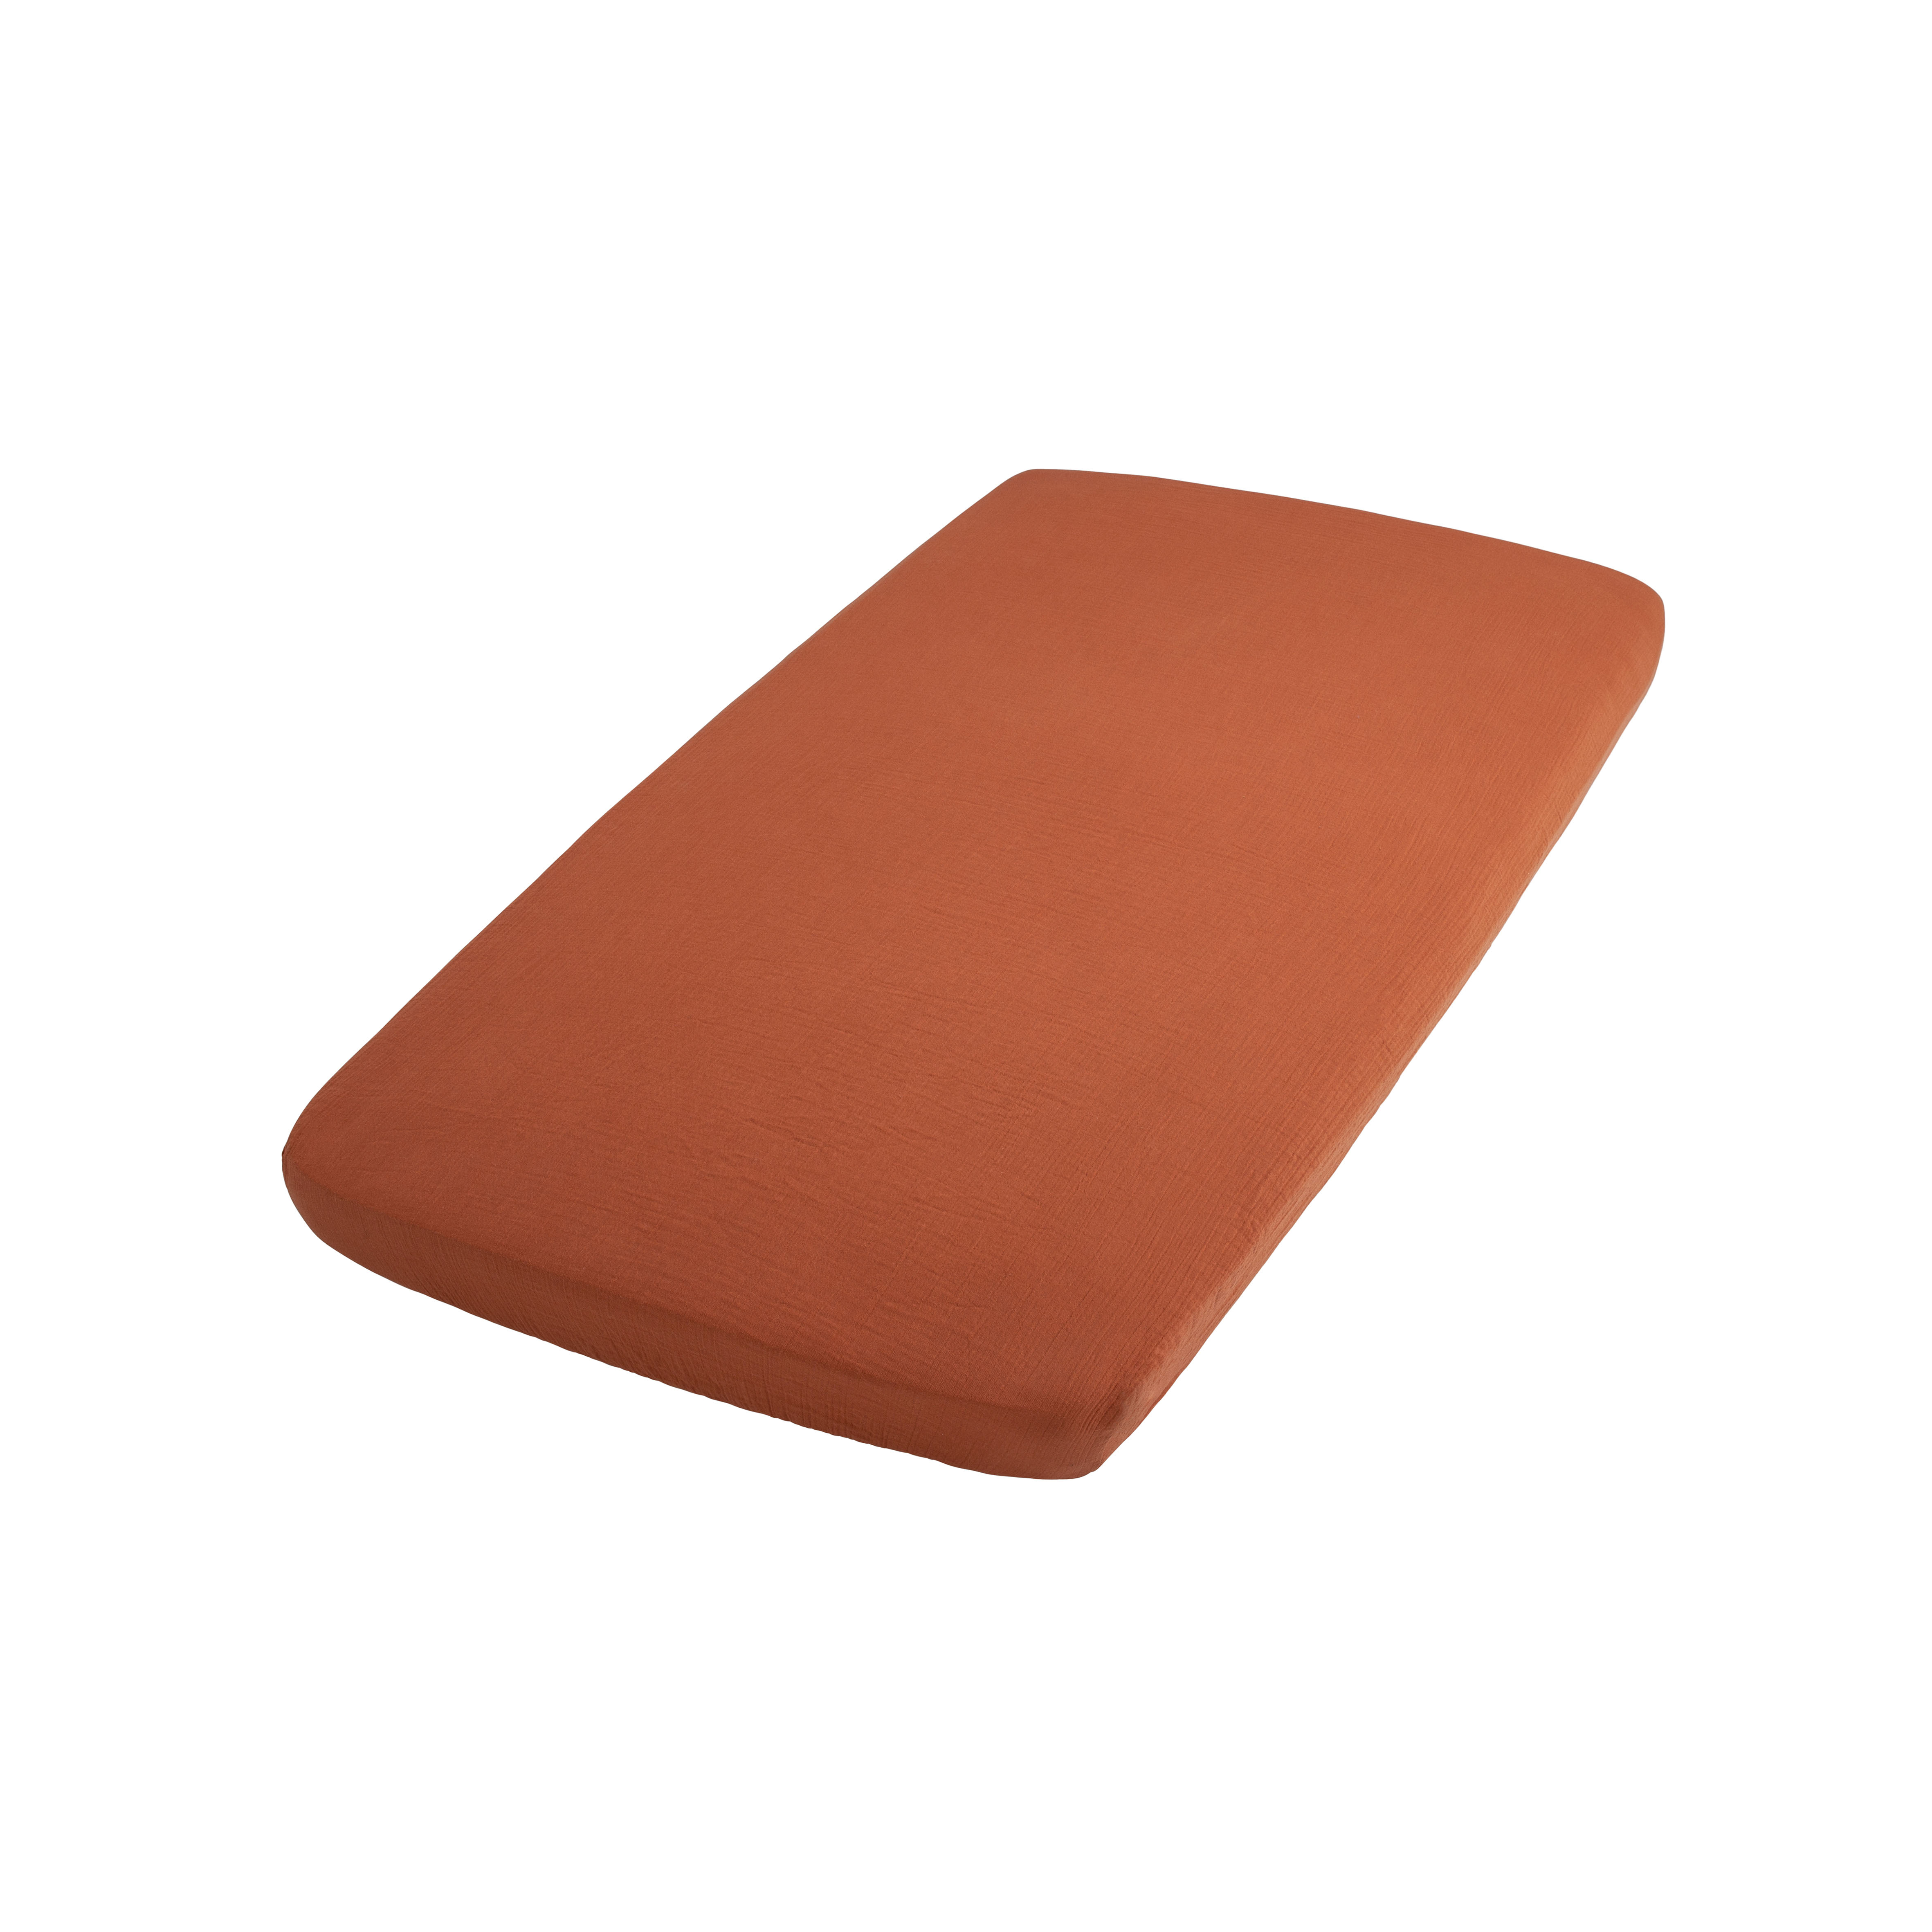 Fitted sheet Breeze rust - 40x80